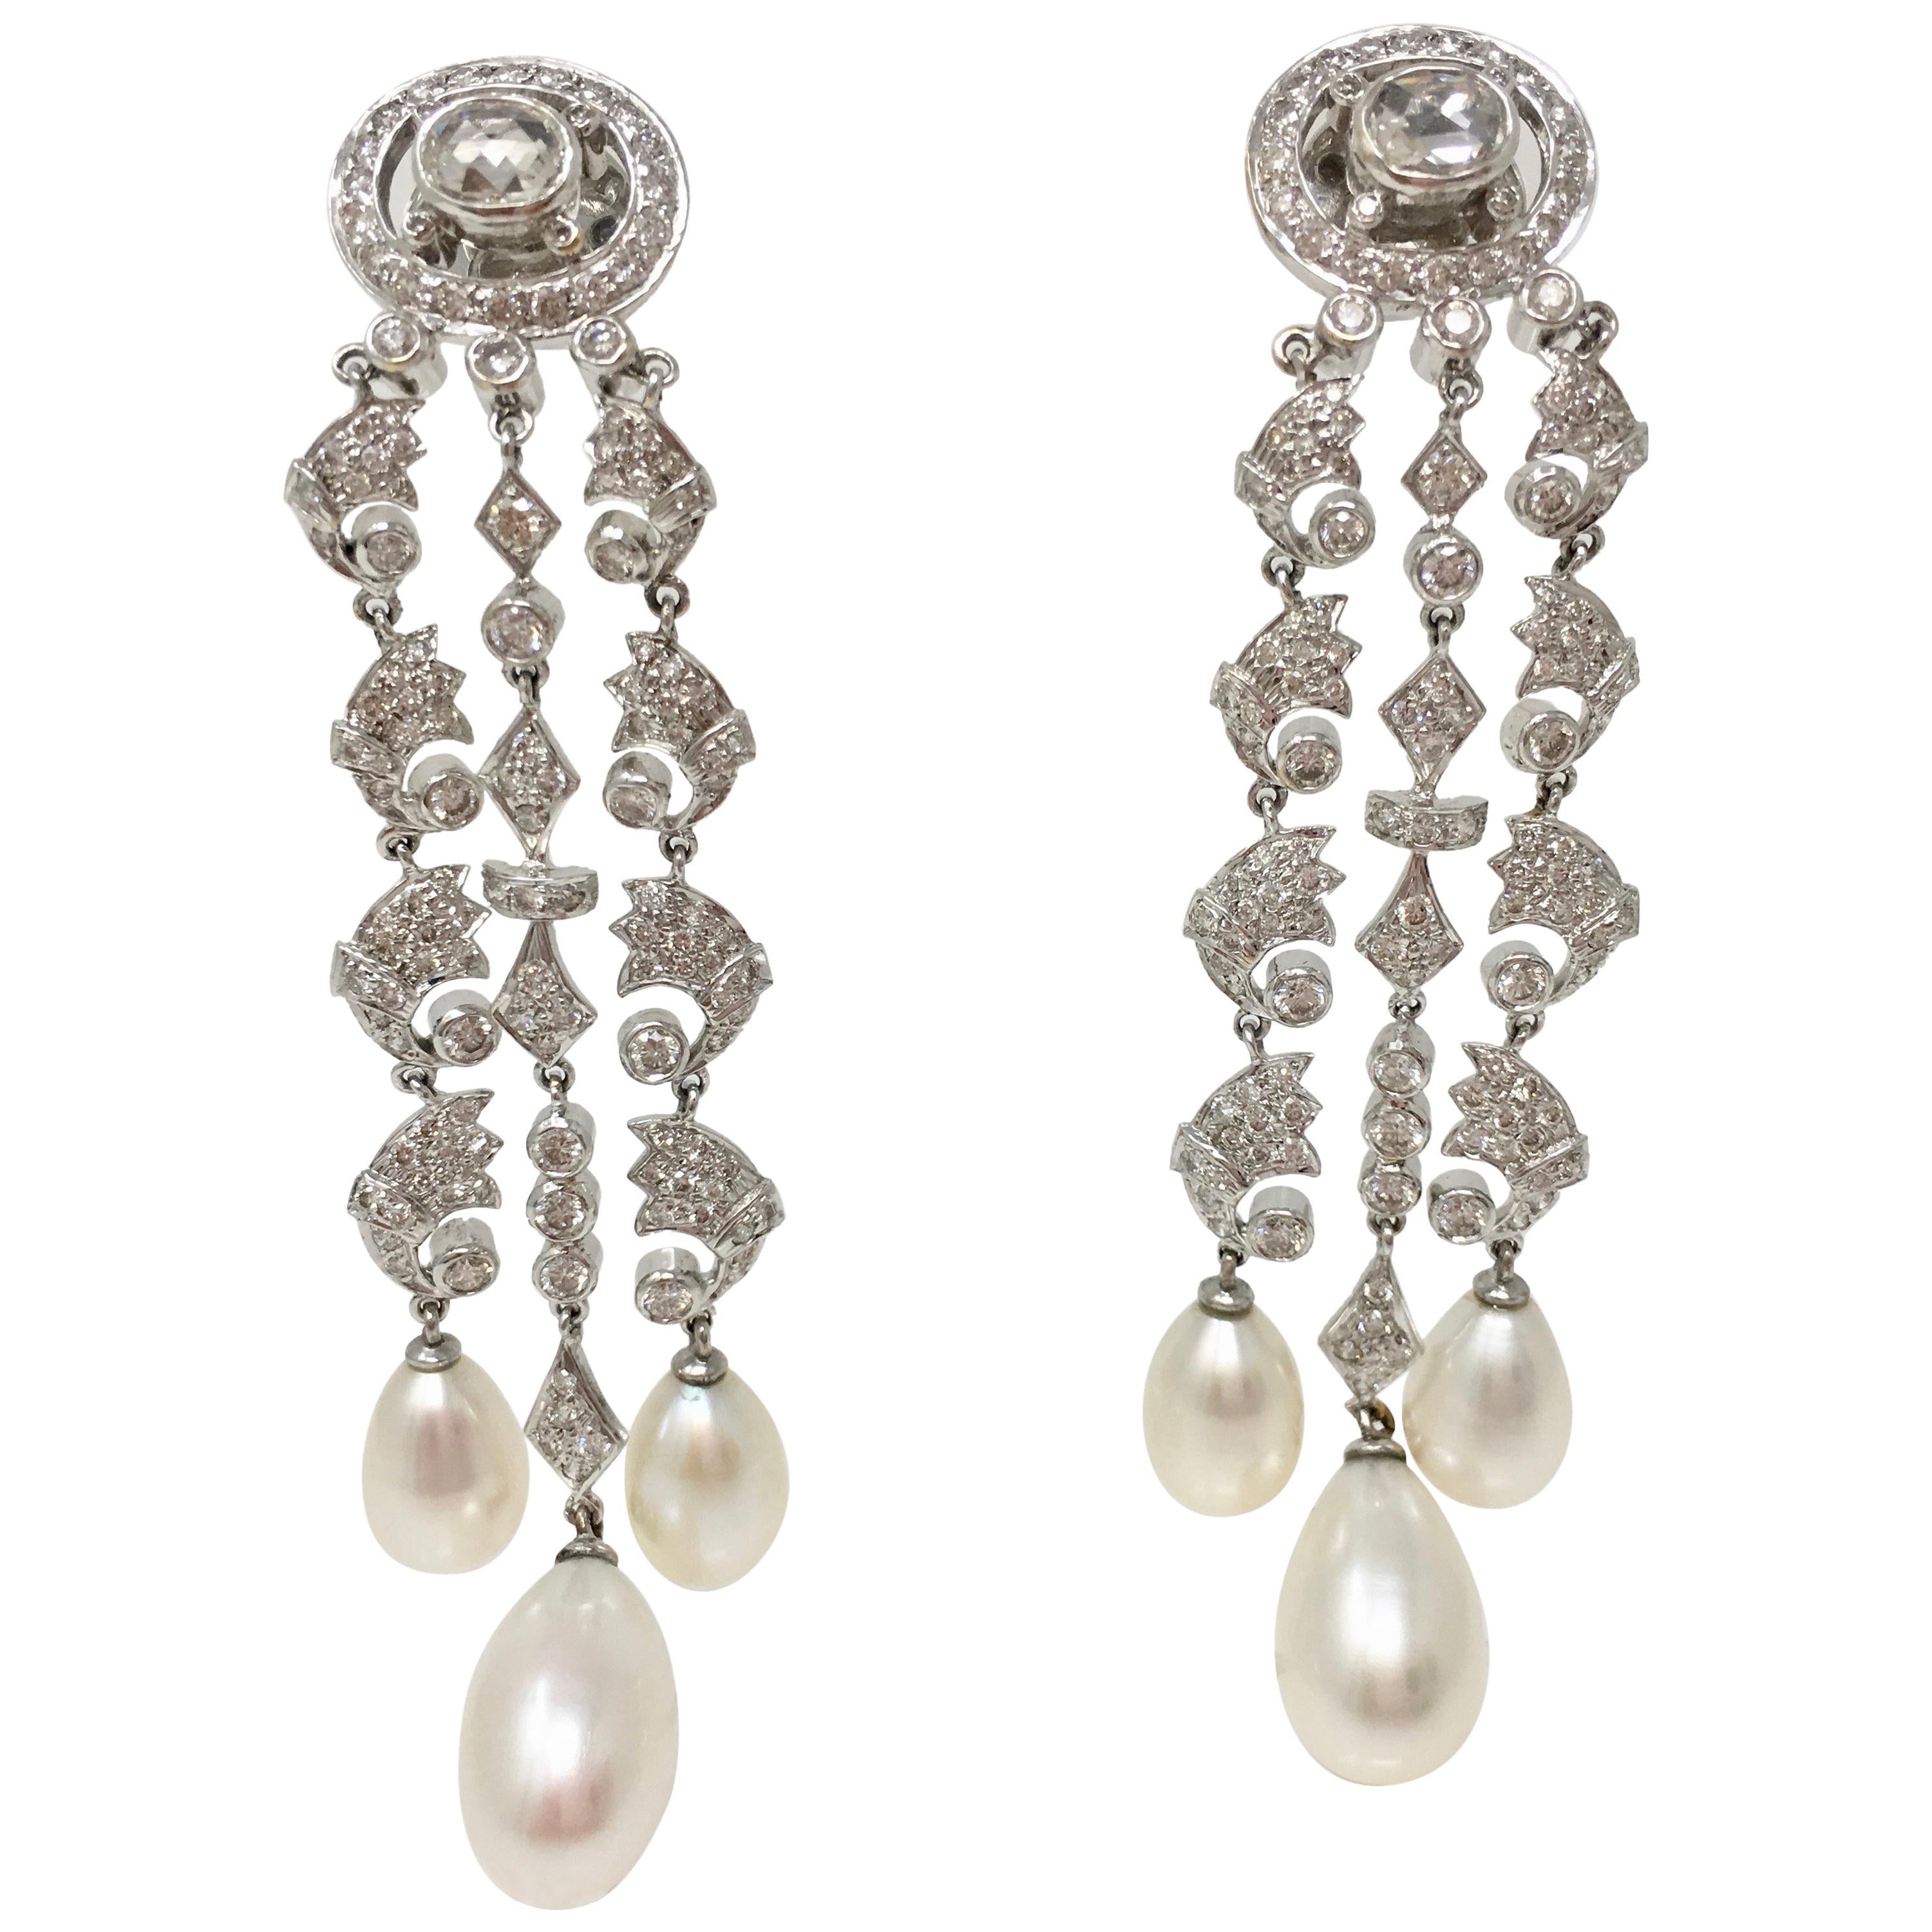 White Round Brilliant Diamond And White South Sea Pearl Earrings In 18k Gold.  For Sale